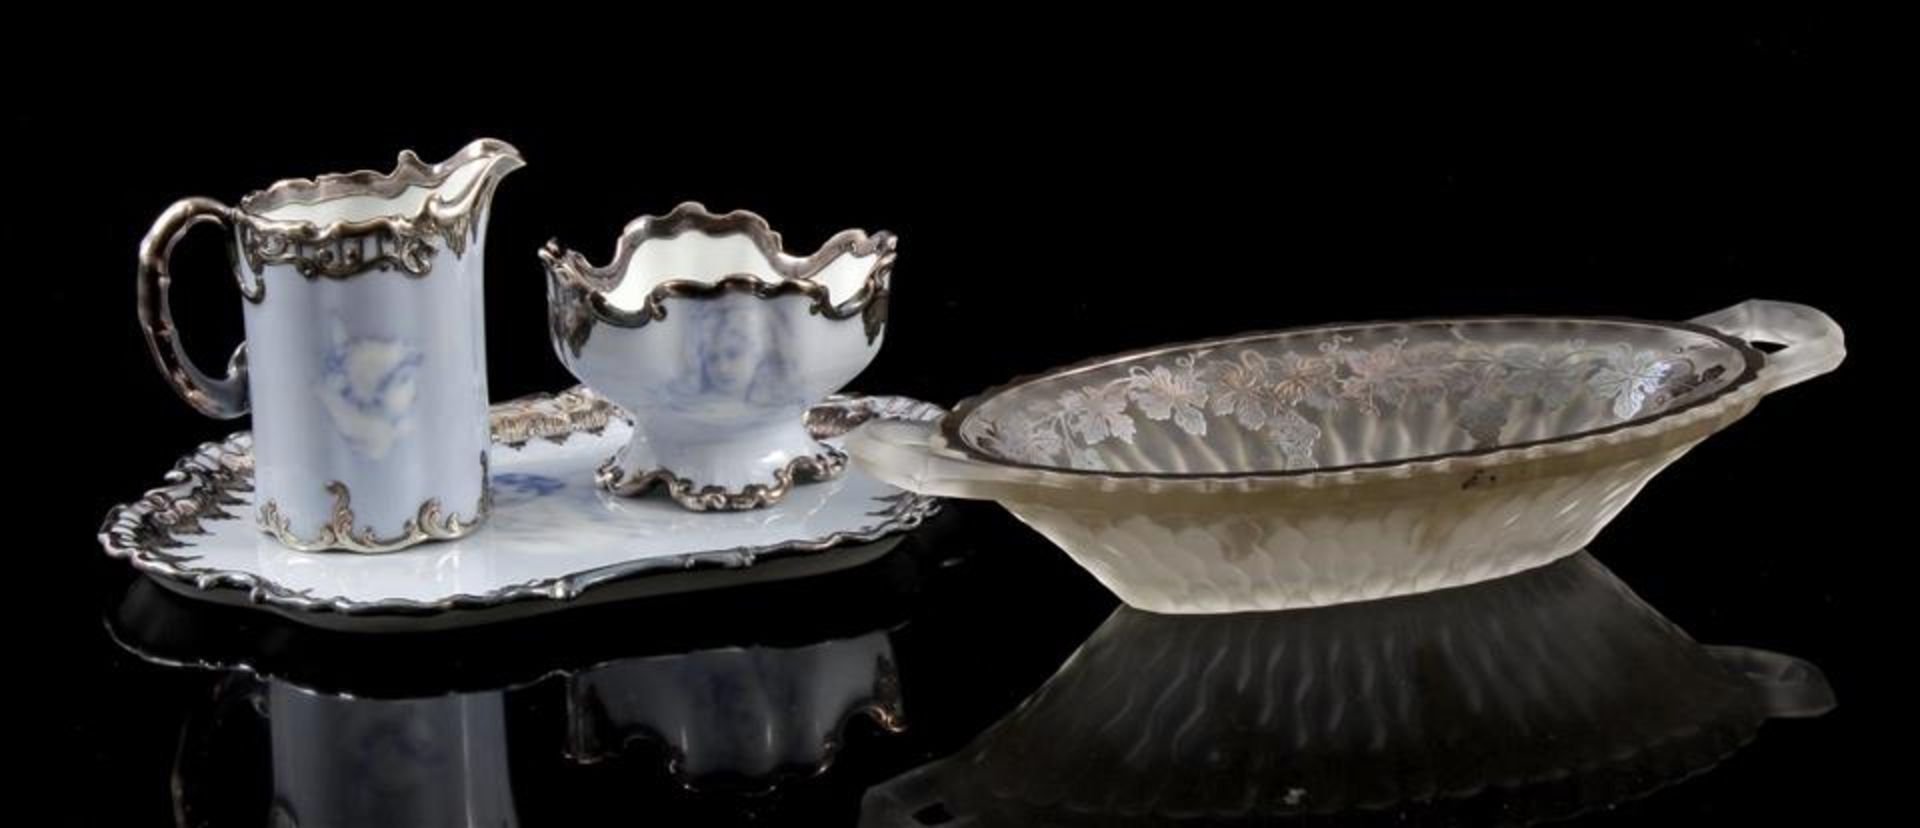 Oval glass pasta dish, decorated with grape leaves and bunches and a 3-part cream set, R.C.